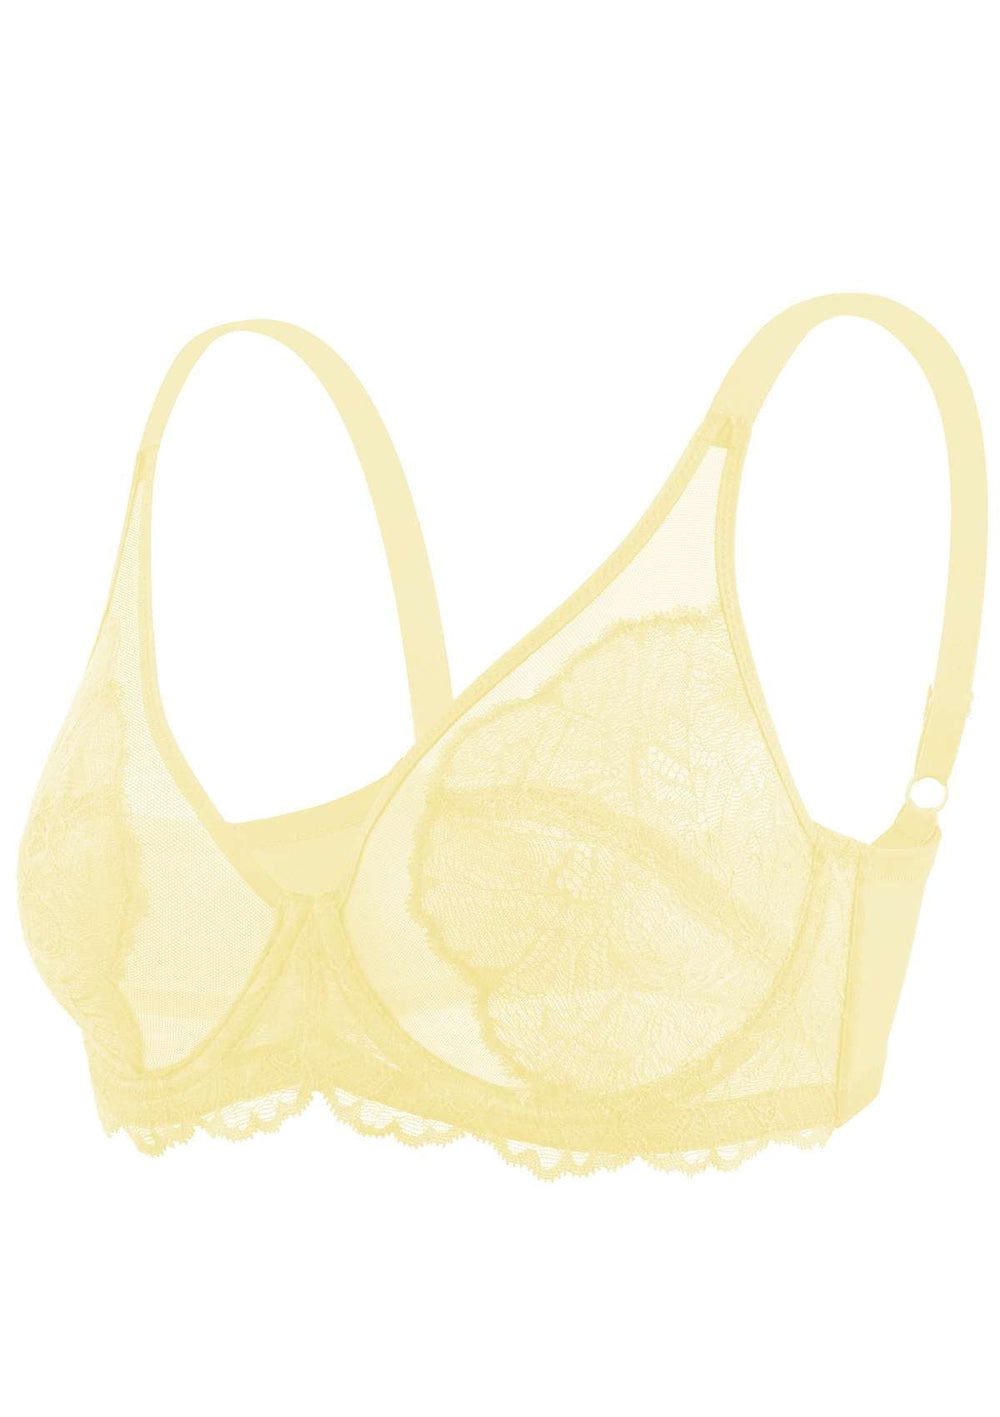 Buy A-GG Yellow Recycled Lace Full Cup Non Padded Bra - 34F, Bras